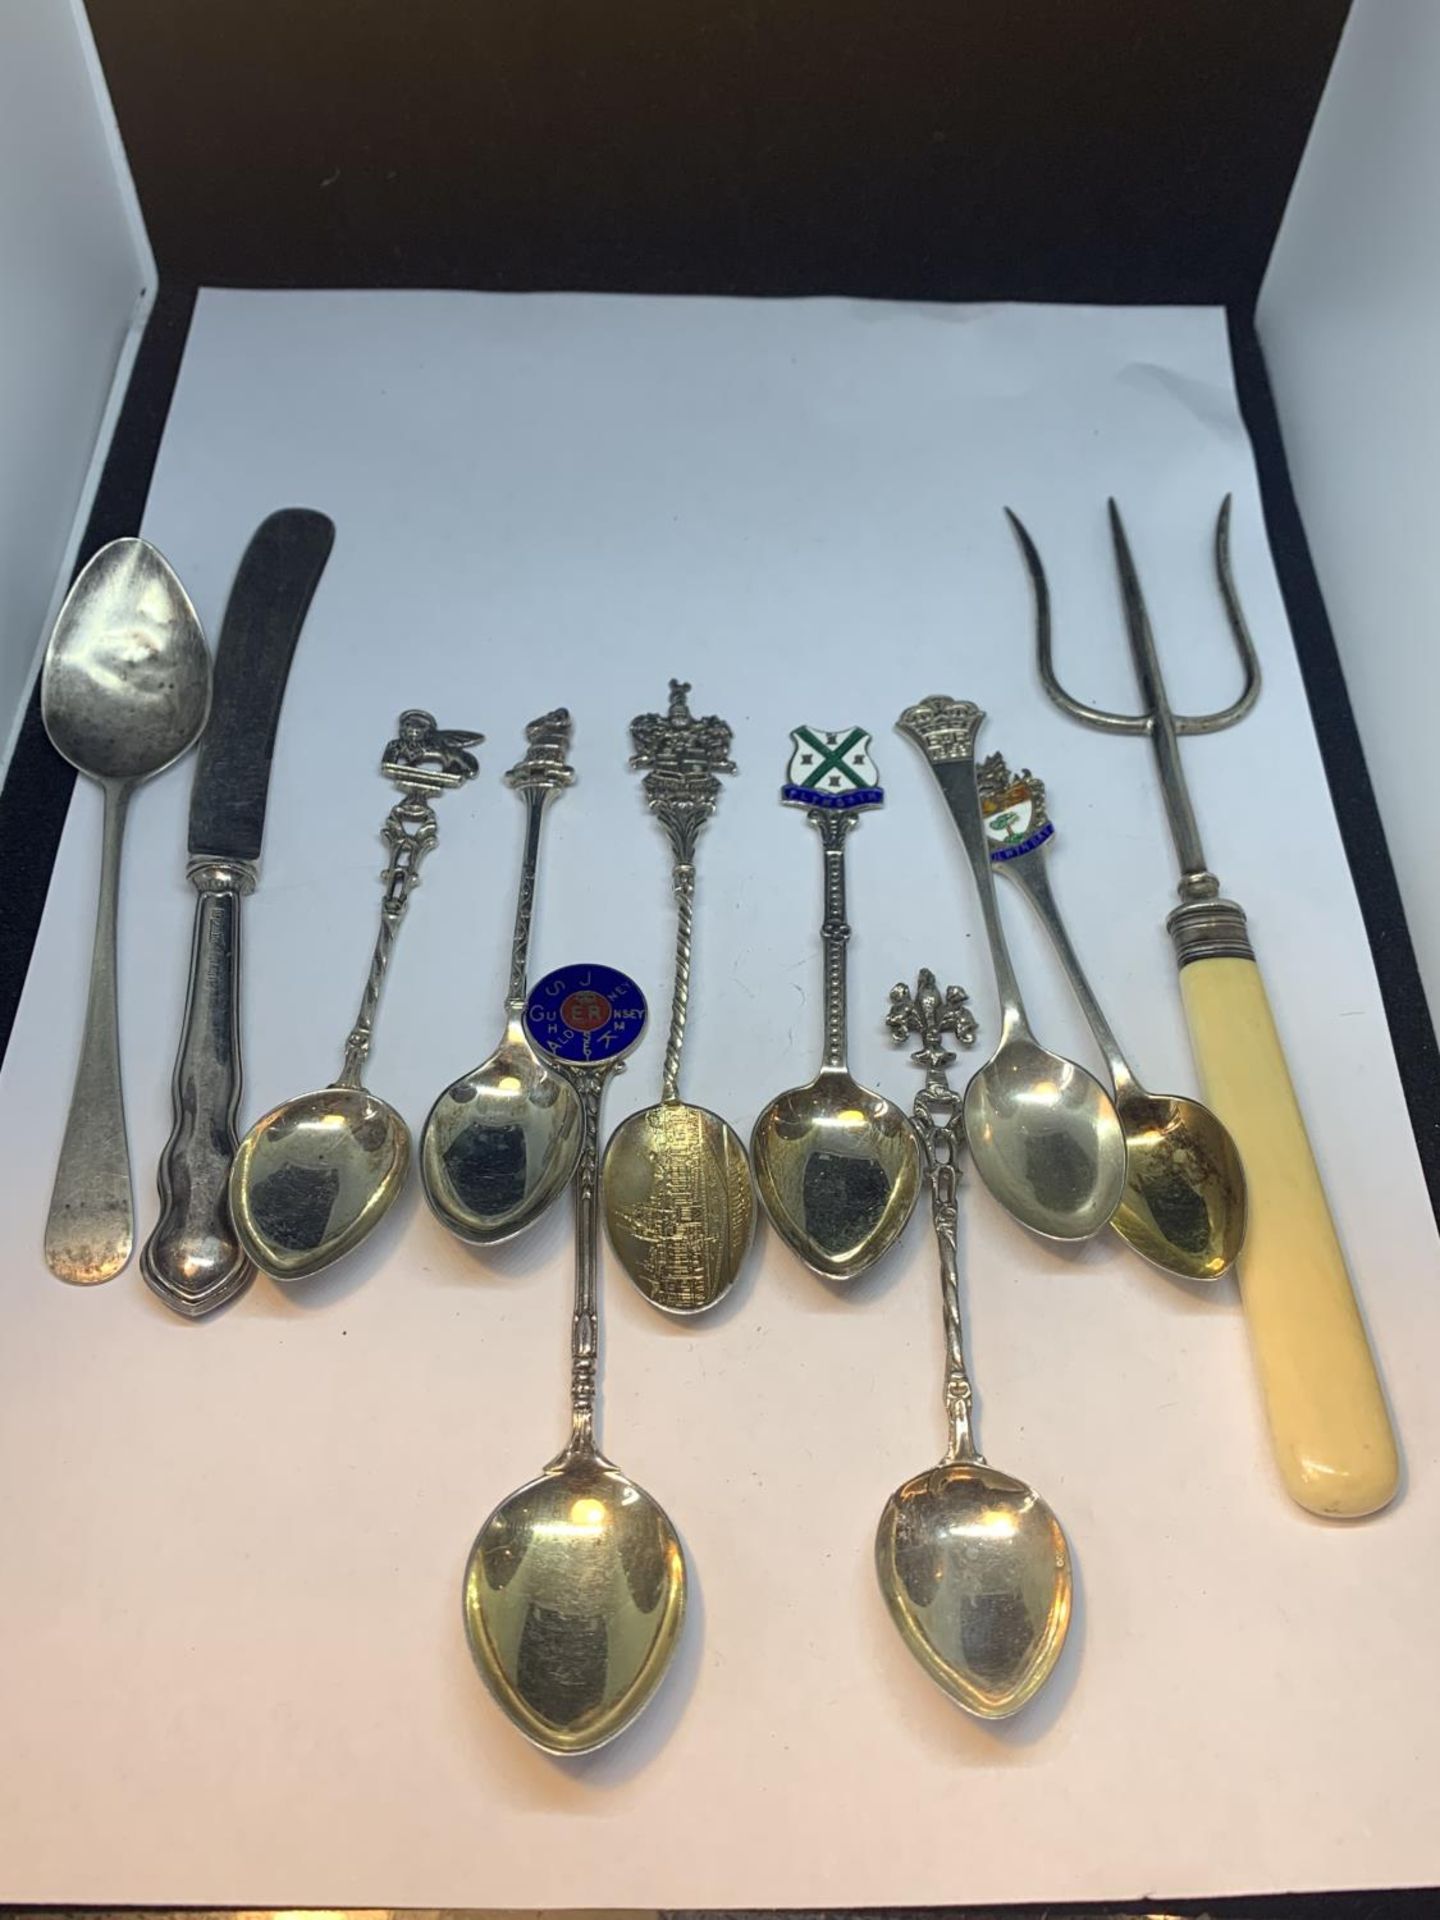 11 PIECES OF HALLMARKED SILVER CUTLERY ALL ITEMS ARE INDIVIDUALLY HALLMARKED GROSS WEIGHT 184g